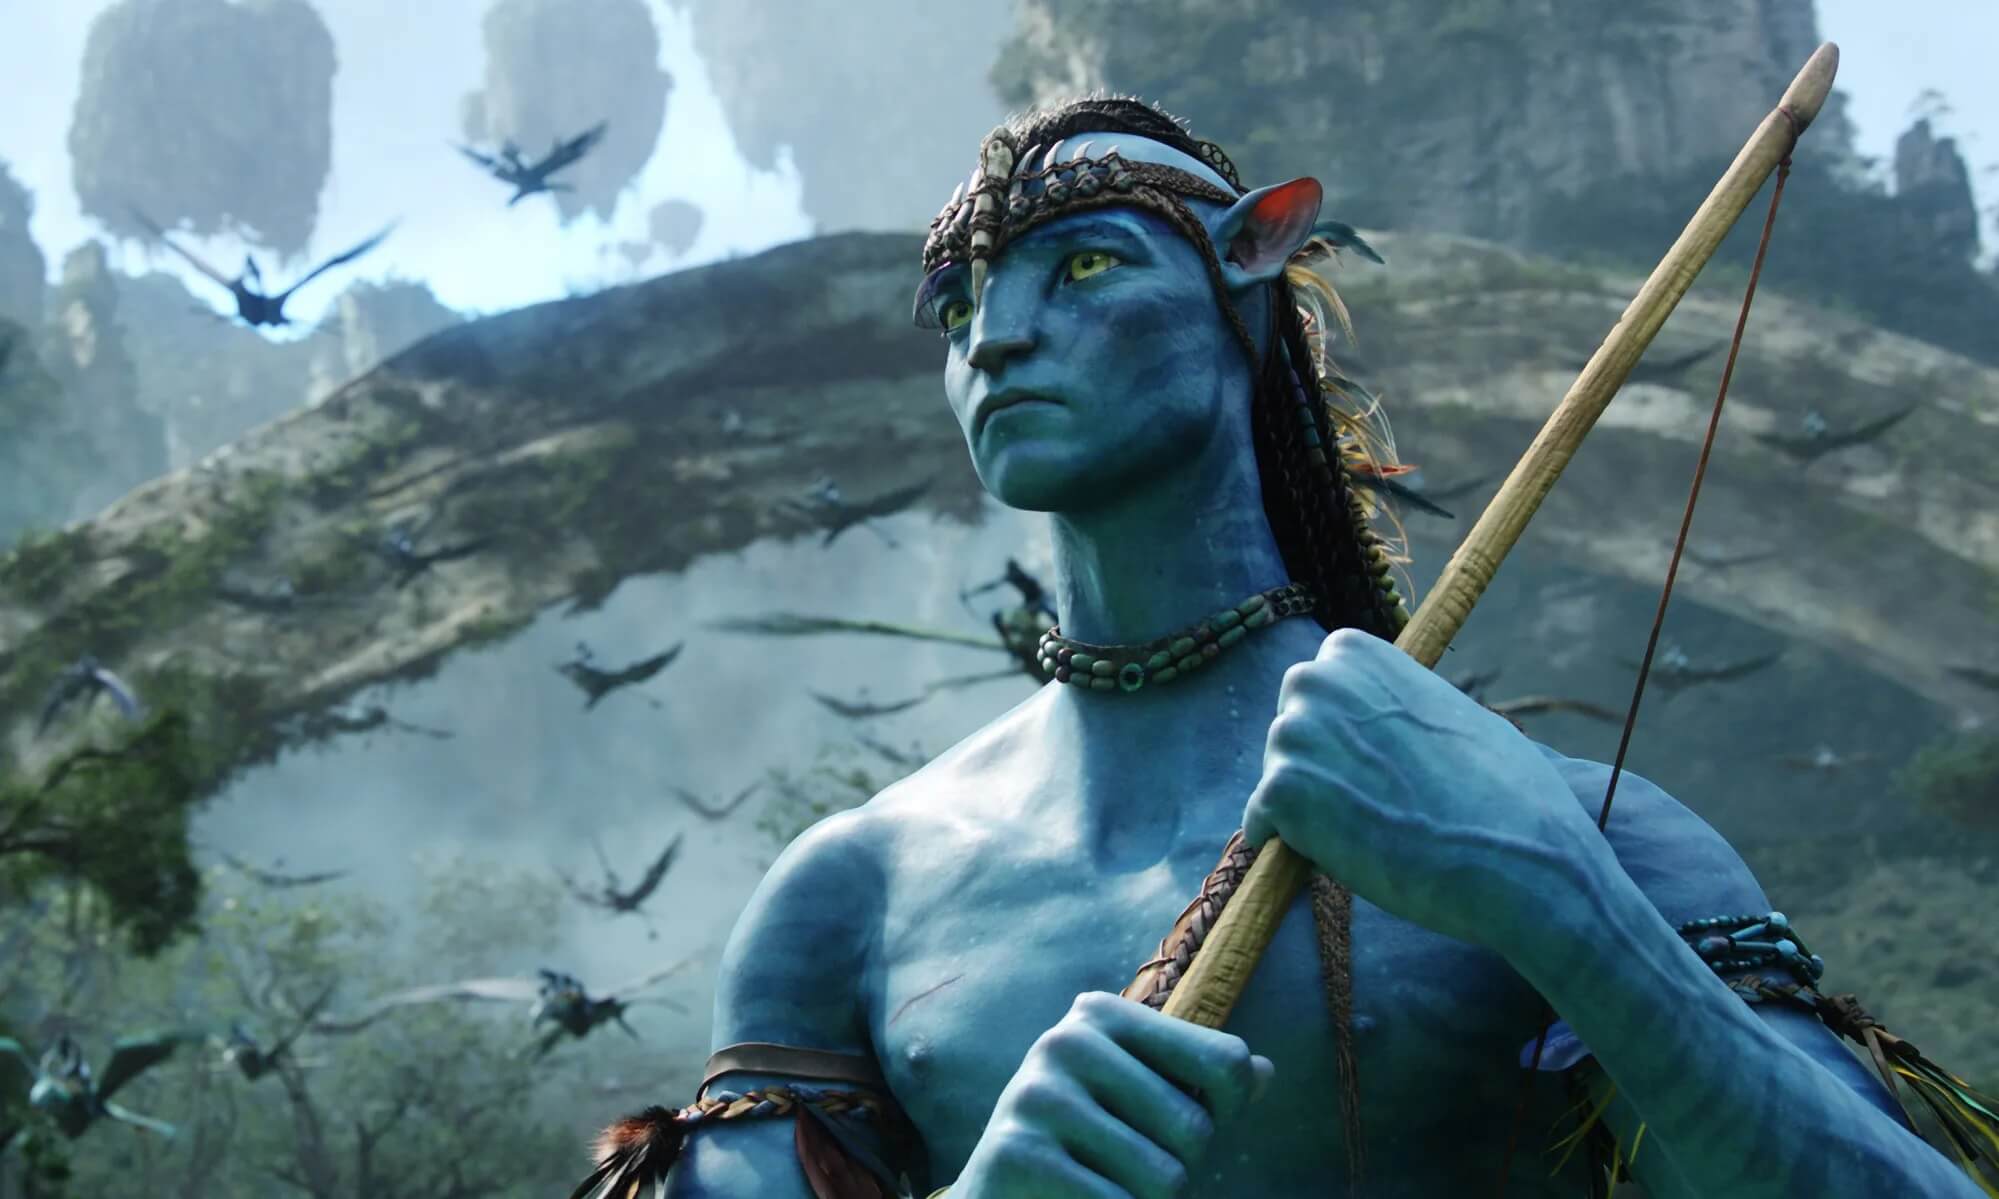 James Cameron says Avatar 4 is a 'motherfucker' — but he might not